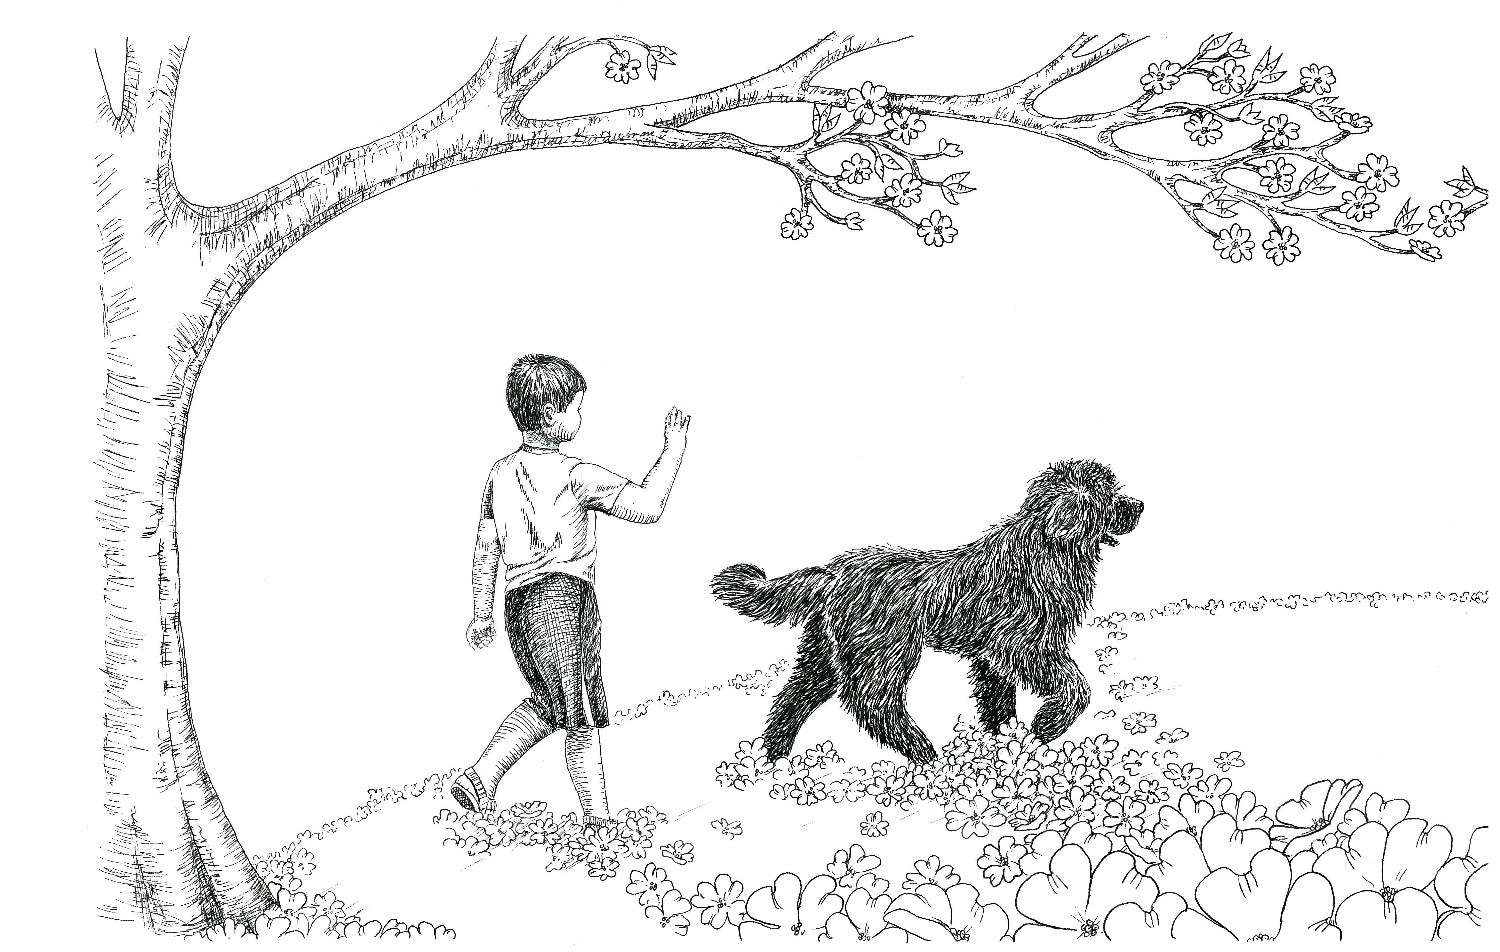 "The ABC of Mannerly Me: A Dog’s Tale of Kindness"